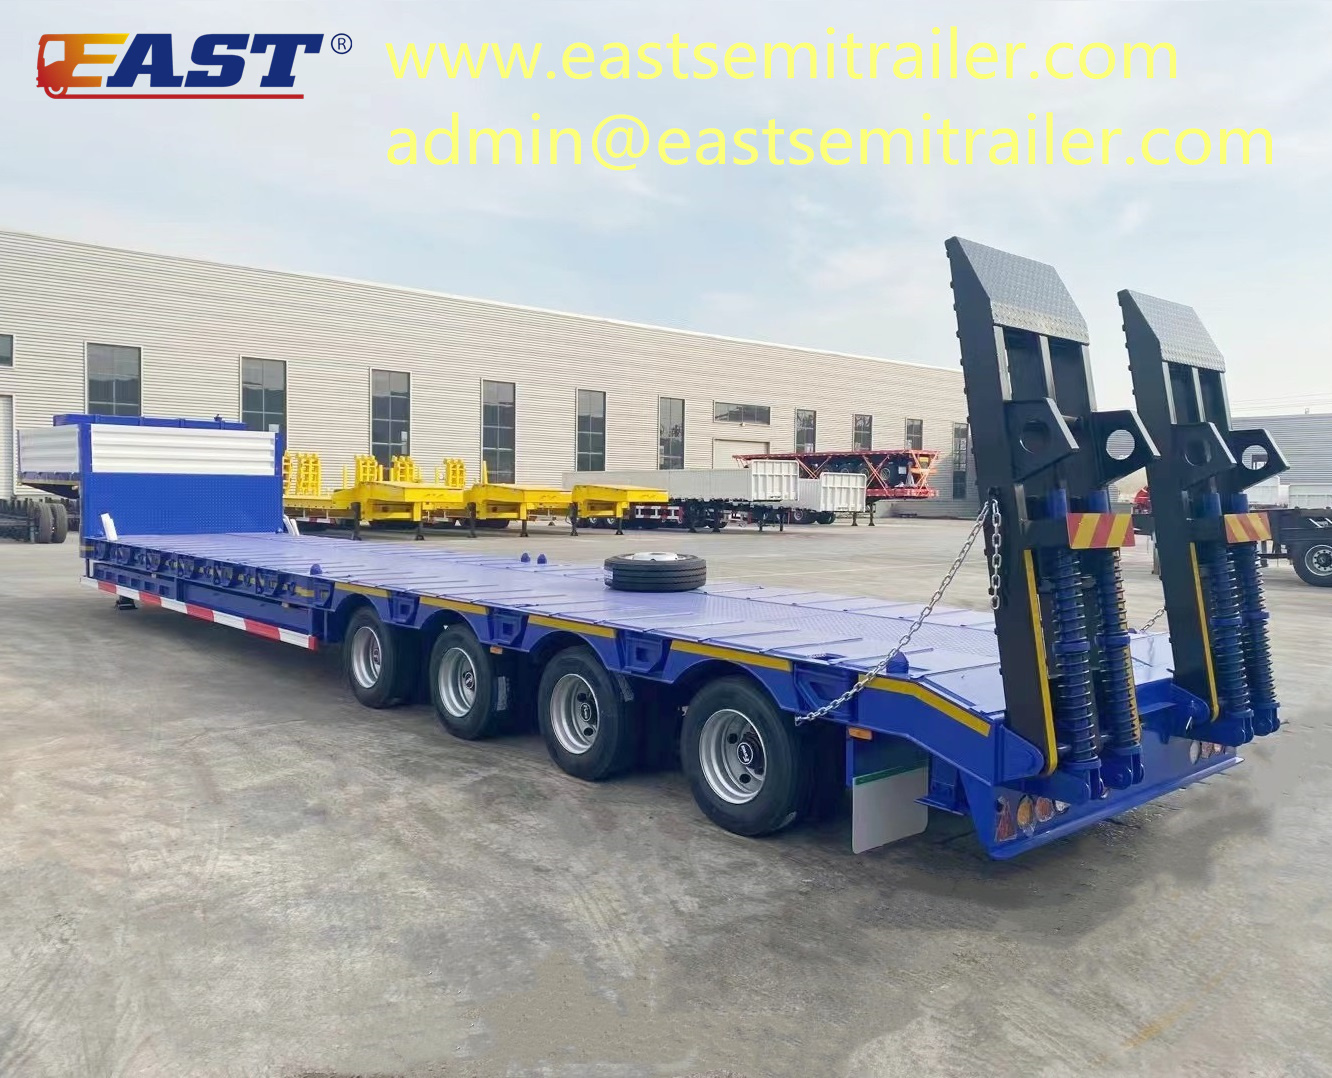 4 axle Lowbed trailer with twist lock installed